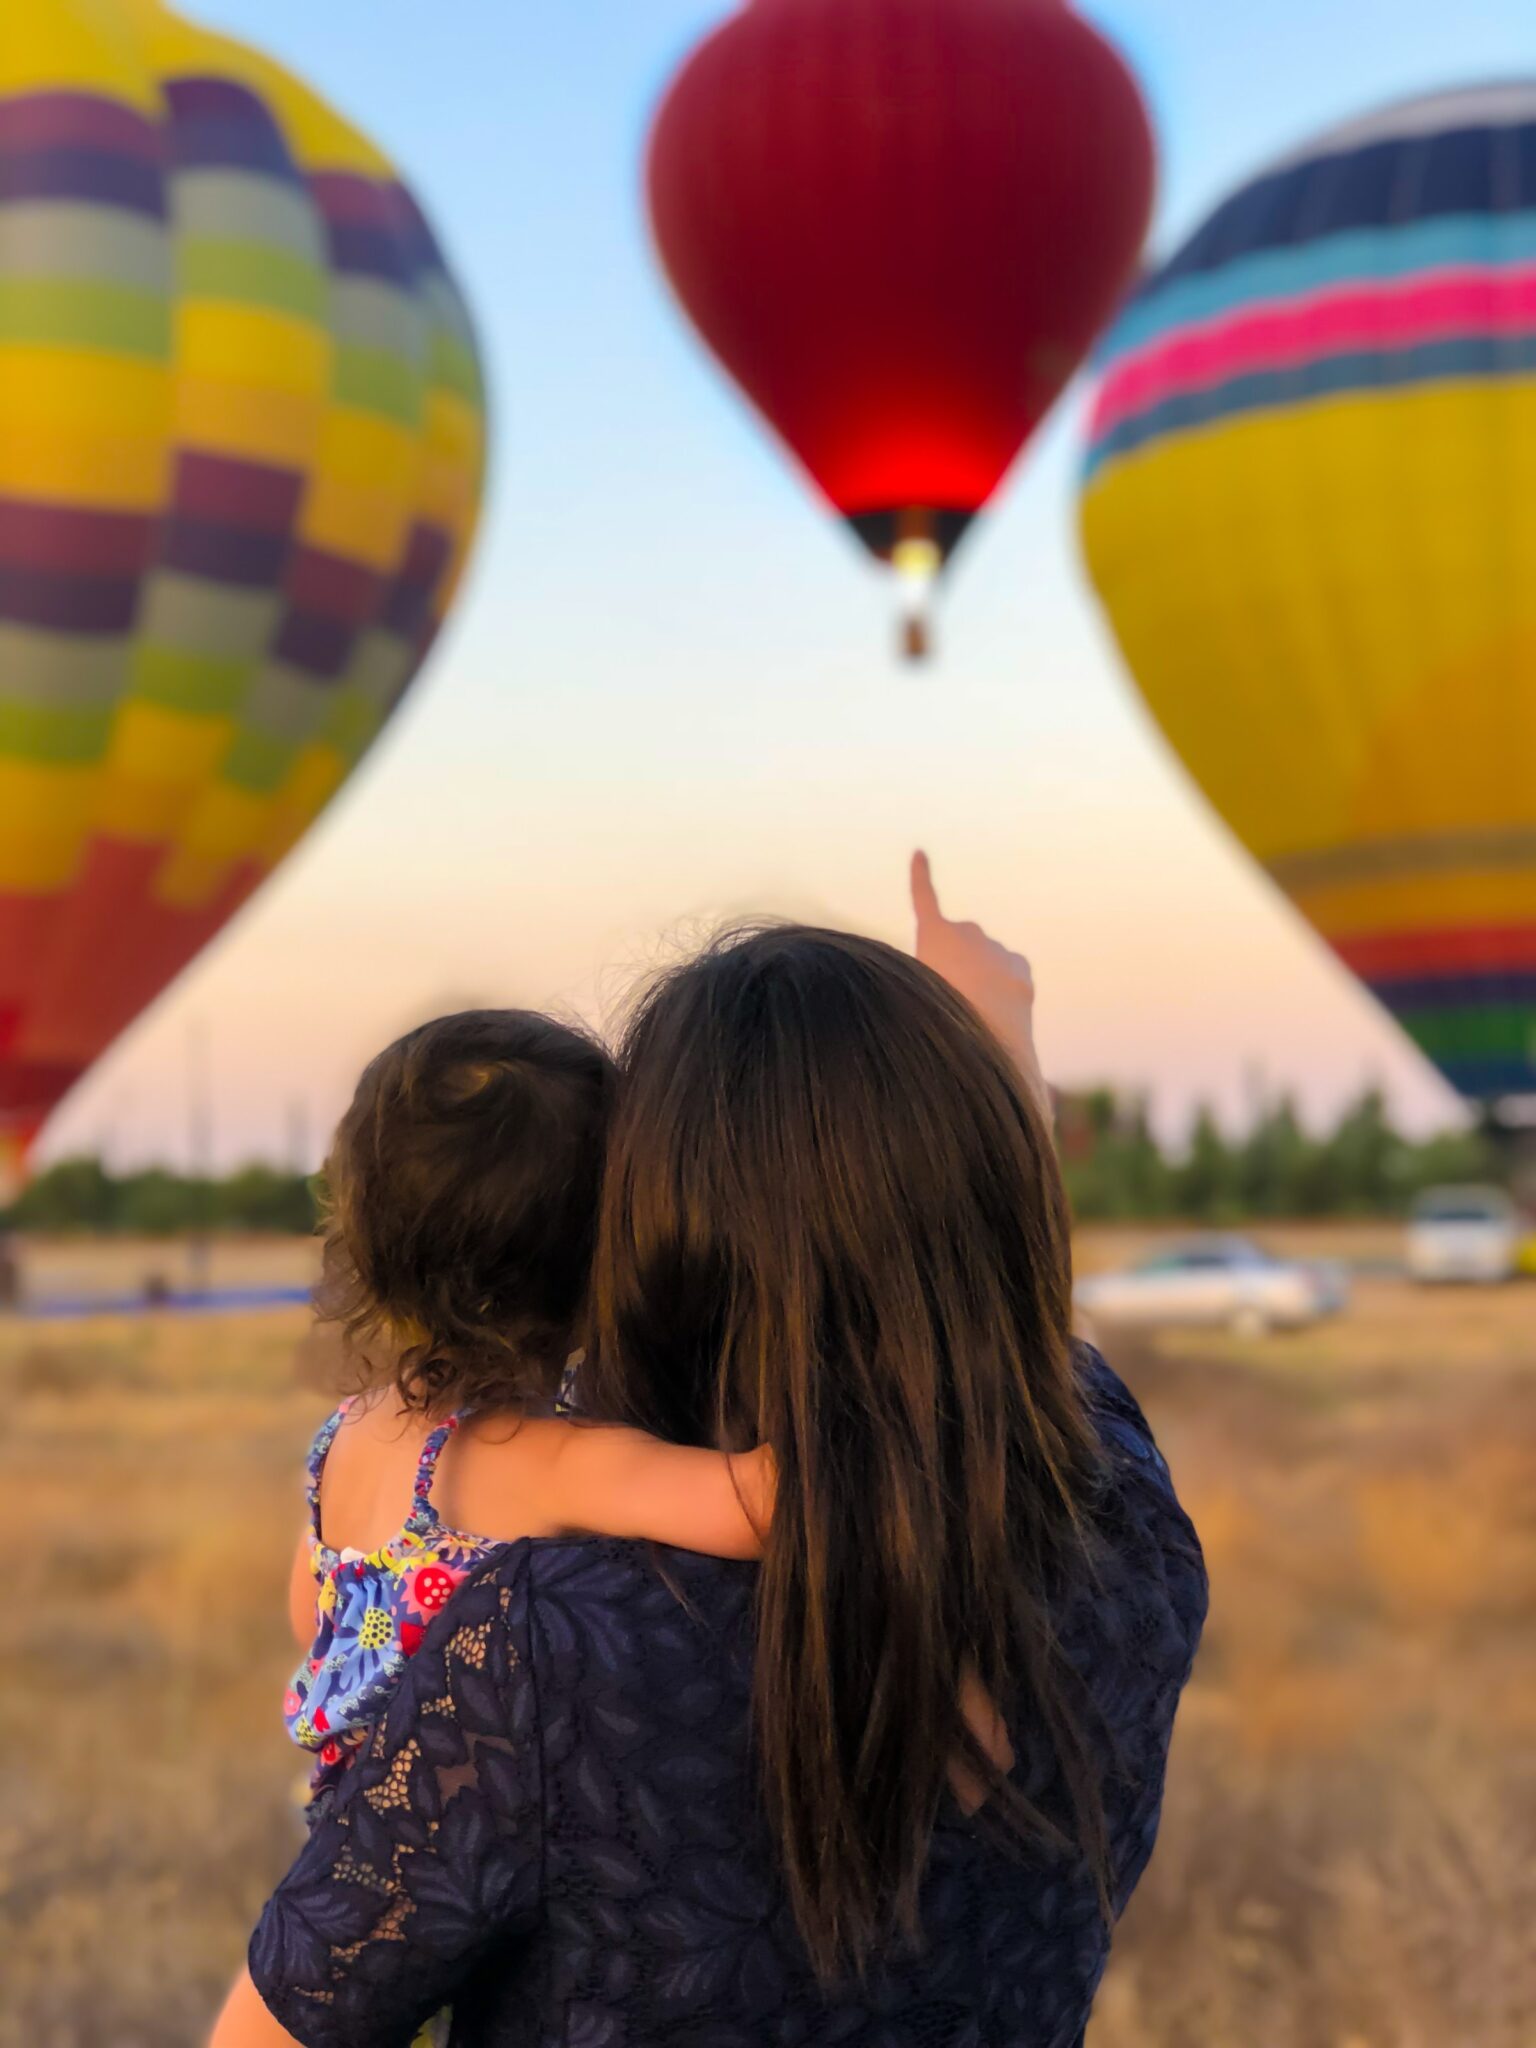 mother and child looking at hot air balloons cary nc. Counselor accepting new patients near me in Cary North Carolina.